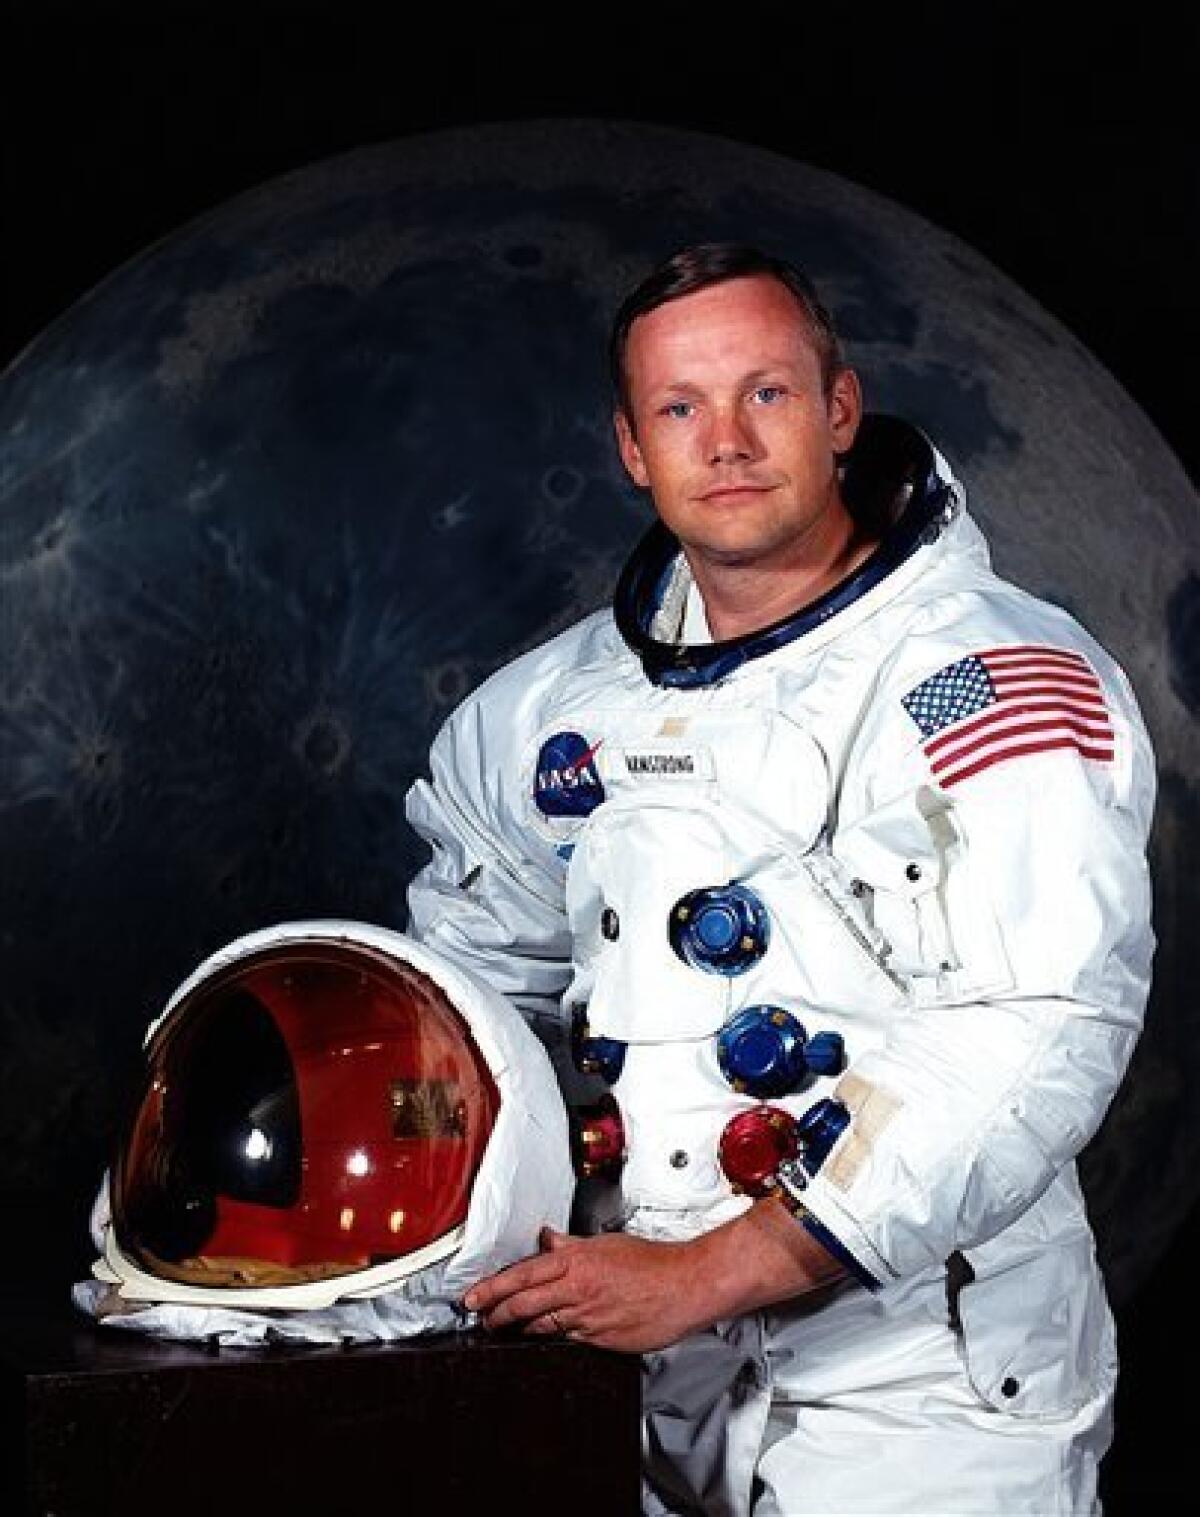 FILE - This undated file photo provided by NASA shows Neil Armstrong. The family of Neil Armstrong, the first man to walk on the moon, says he died Saturday, Aug. 25, 2012, at age 82. A statement from the family says Armstrong died following complications resulting from cardiovascular procedures. It doesn't say where he died. Armstrong commanded the Apollo 11 spacecraft that landed on the moon July 20, 1969. He radioed back to Earth the historic news of "one giant leap for mankind." Armstrong and fellow astronaut Edwin "Buzz" Aldrin spent nearly three hours walking on the moon, collecting samples, conducting experiments and taking photographs. In all, 12 Americans walked on the moon from 1969 to 1972. (AP Photo/NASA)